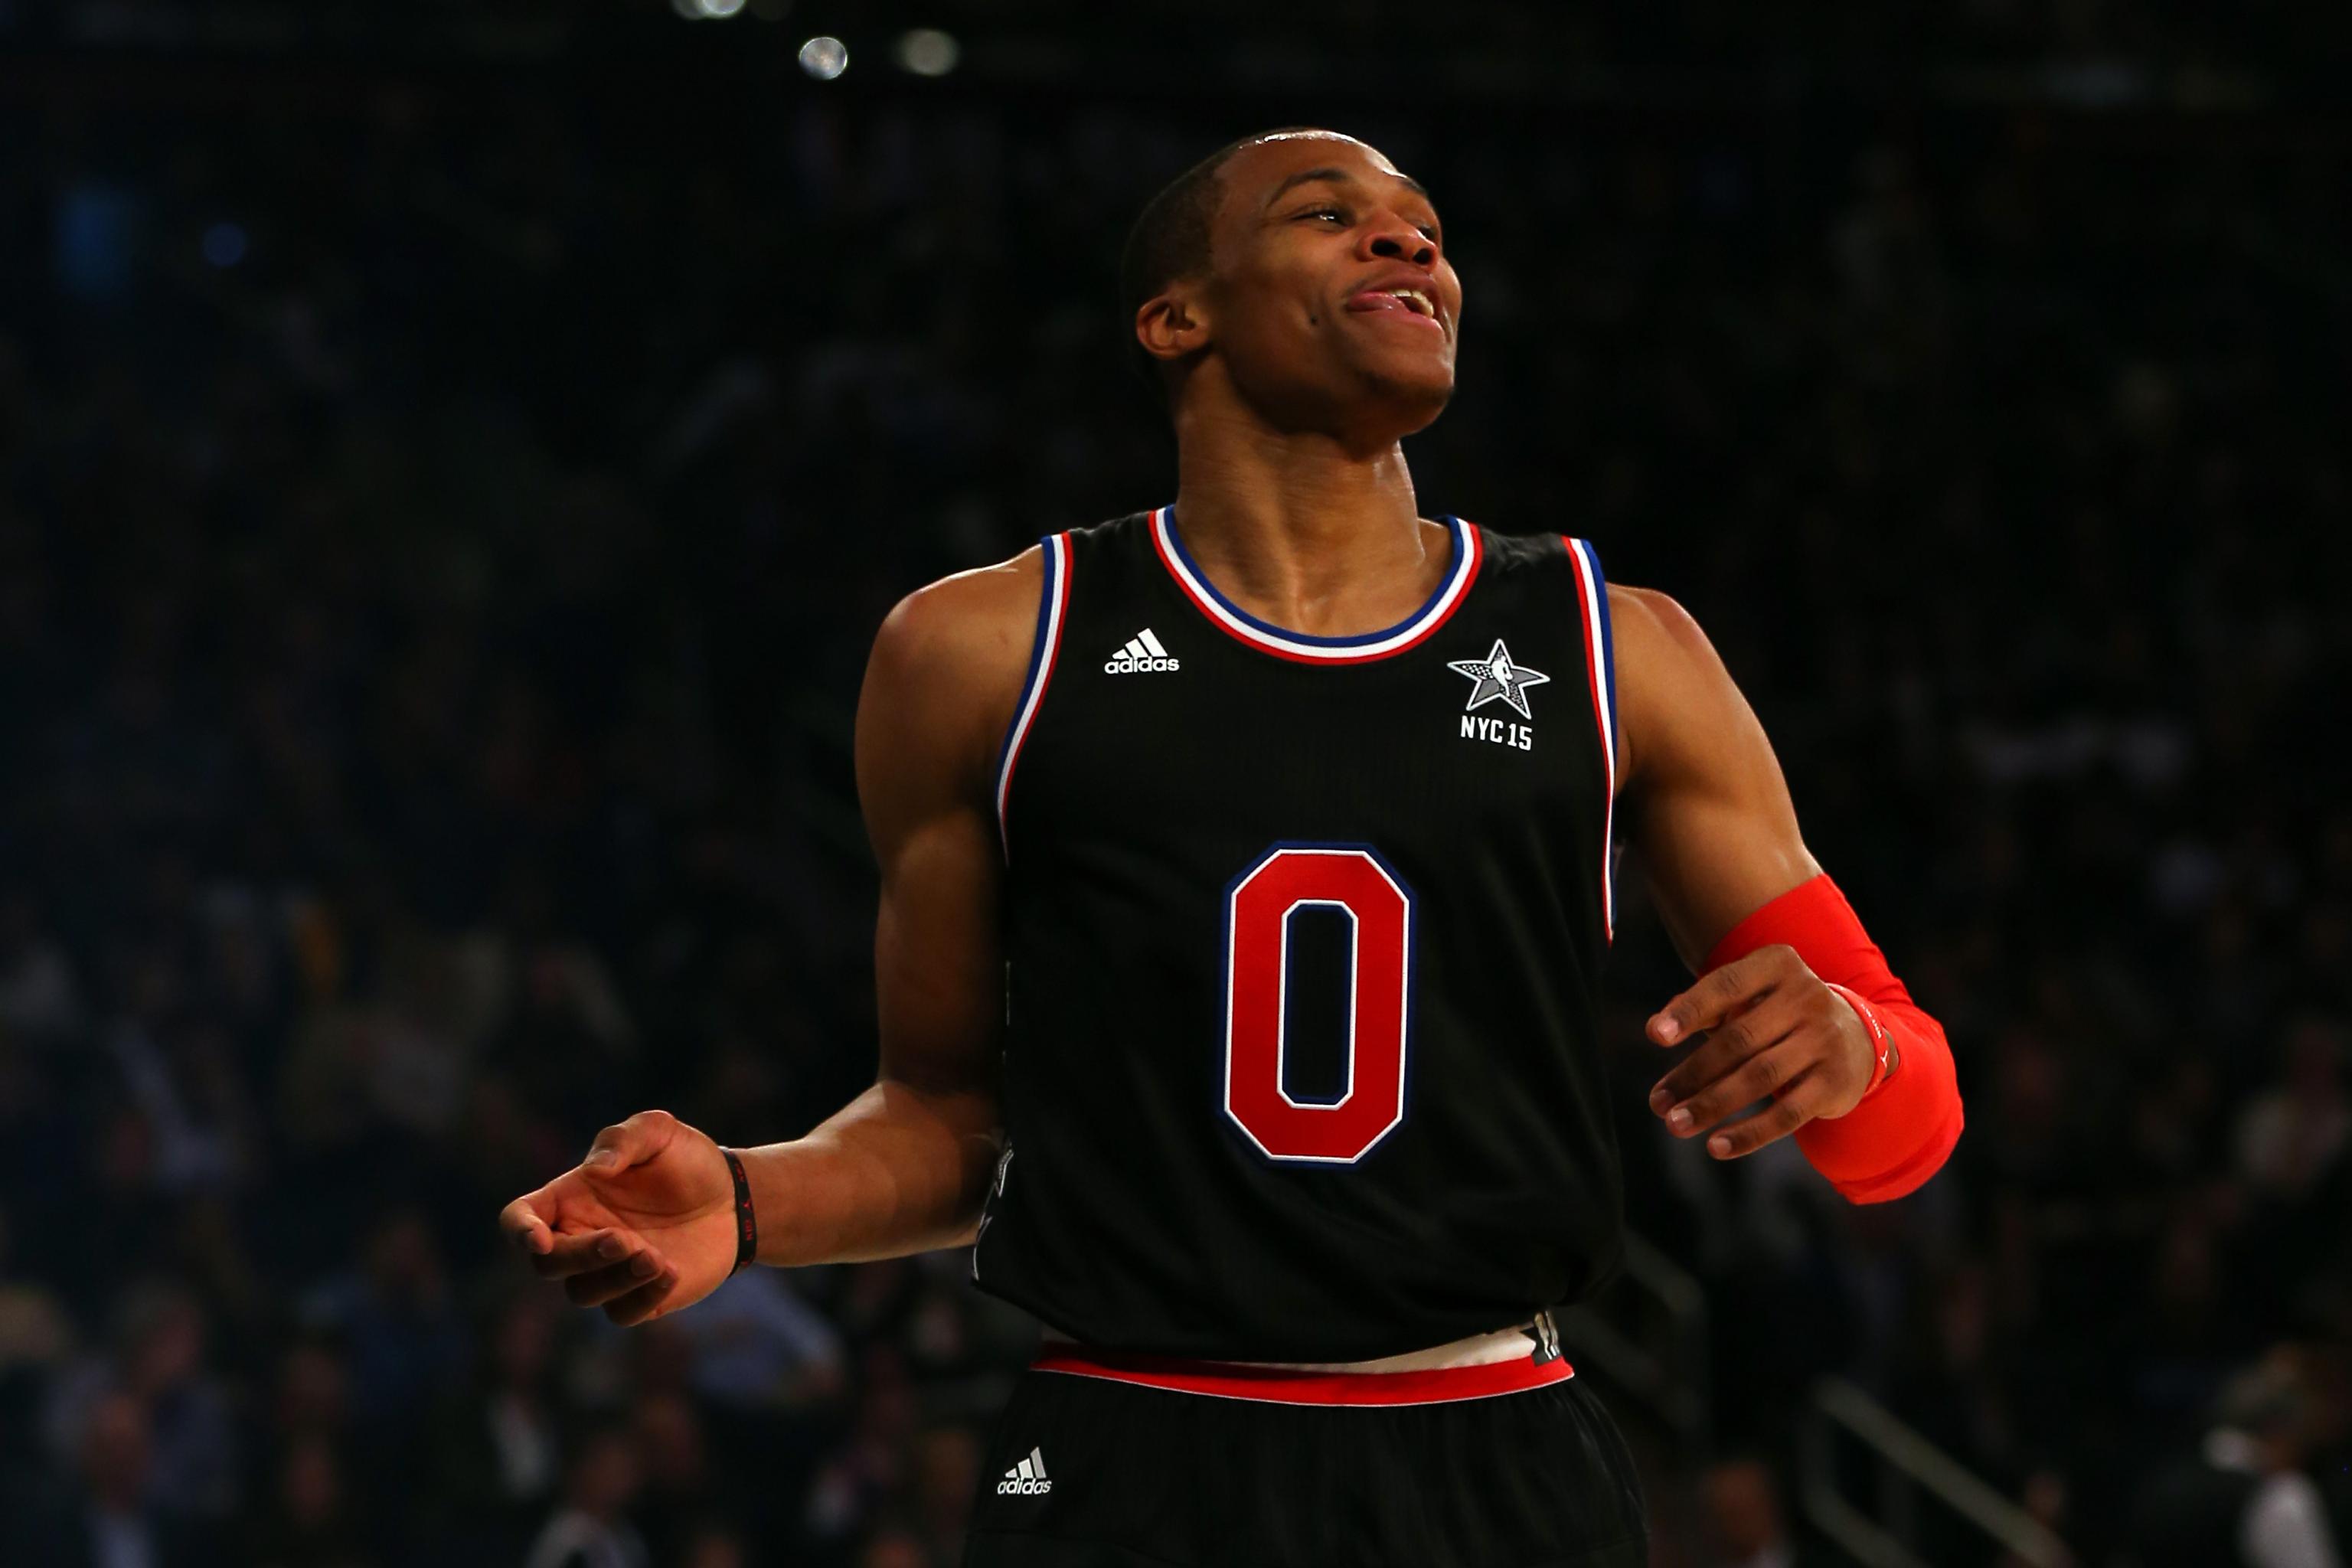 Russellmania! - Russell Westbrook - Image 1 from NBA All-Star Game 2015